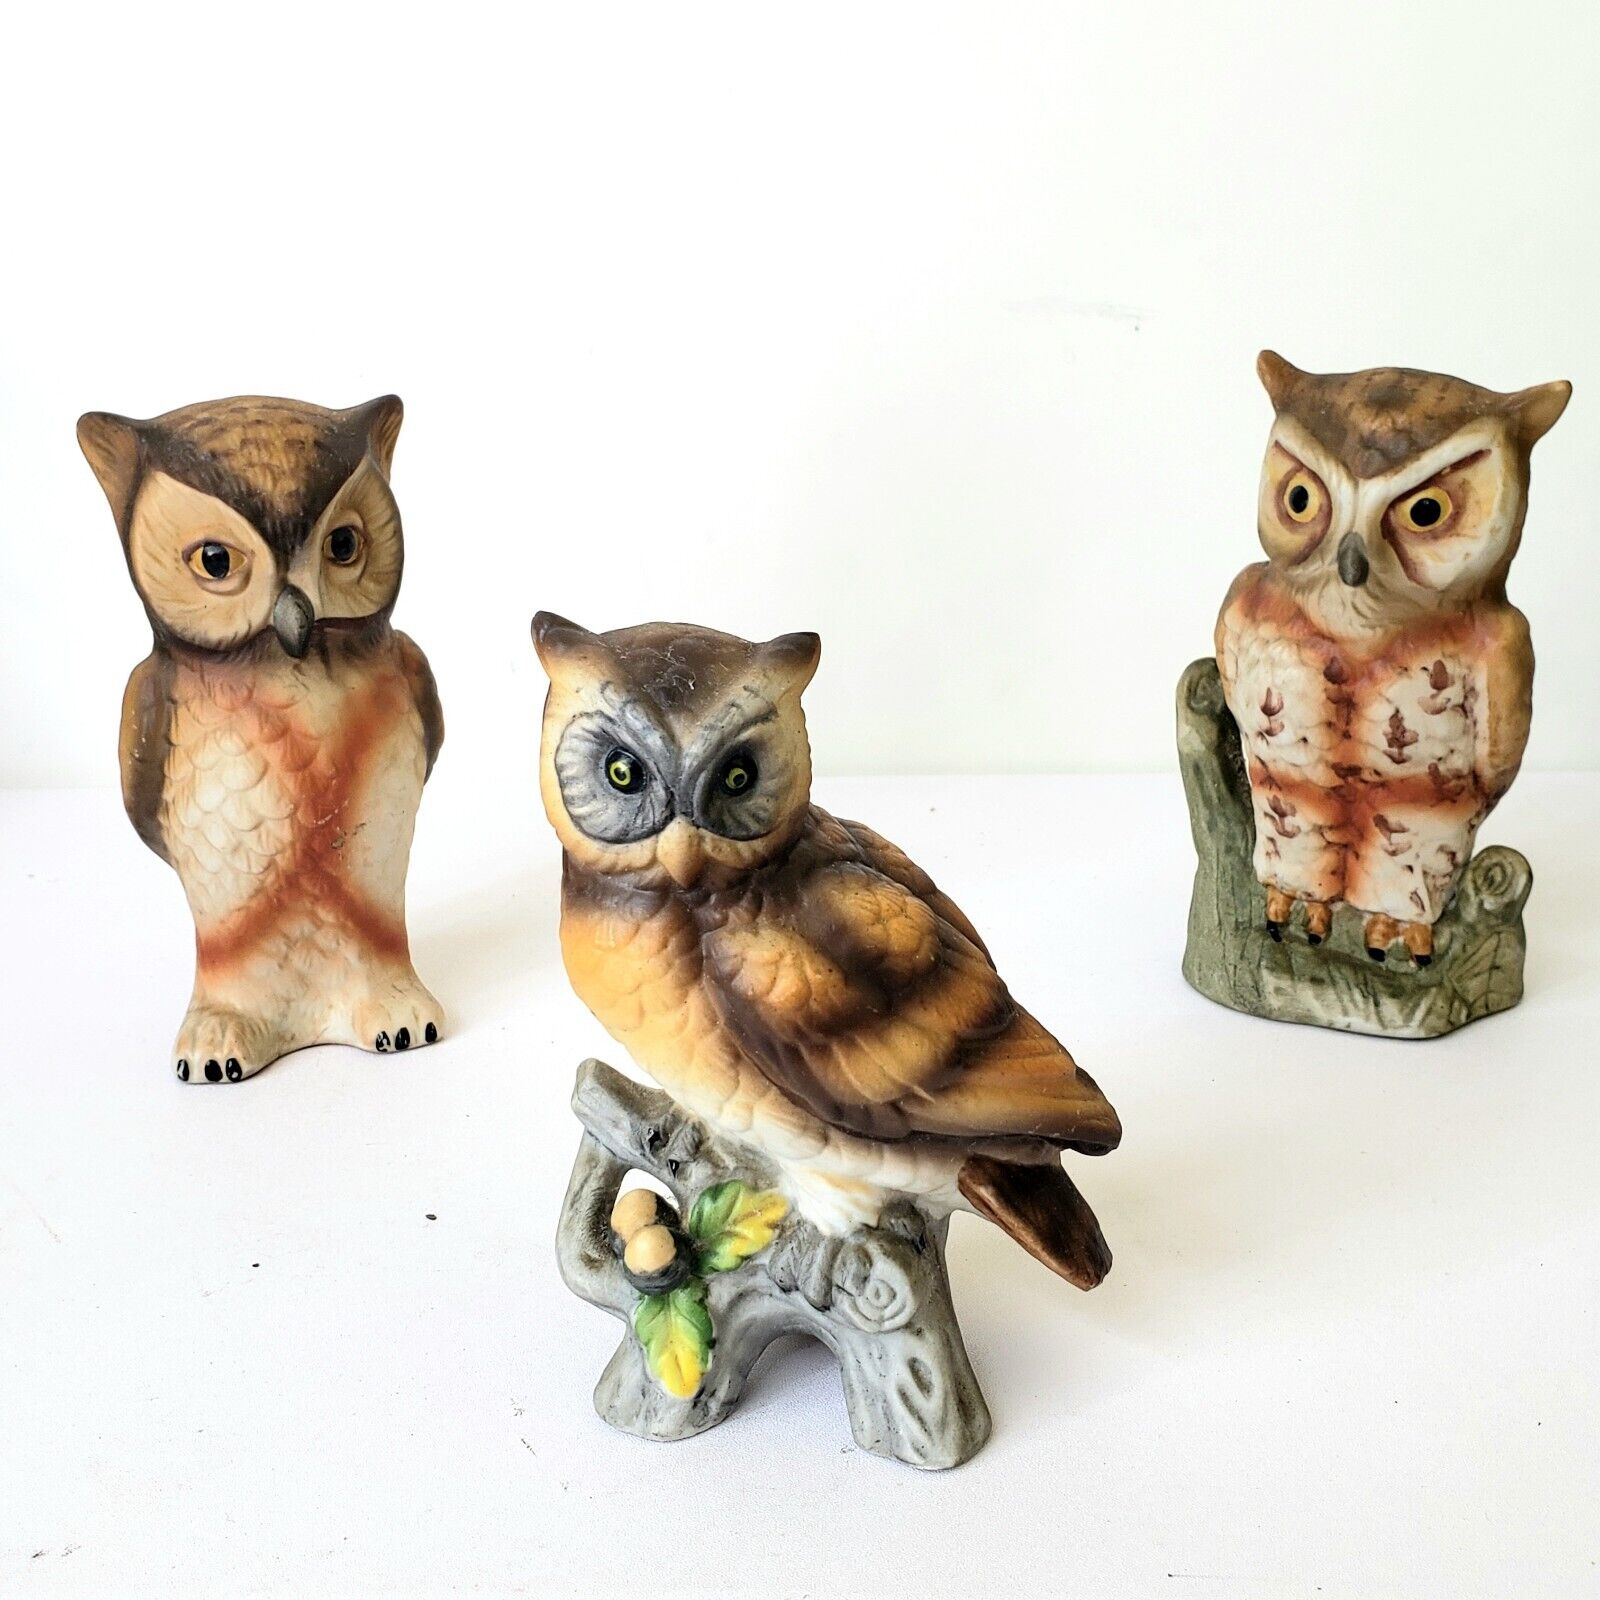 Set of 3 Vintage Porcelain Owl Figurine on Branch With Acorn, Leaves and more. 